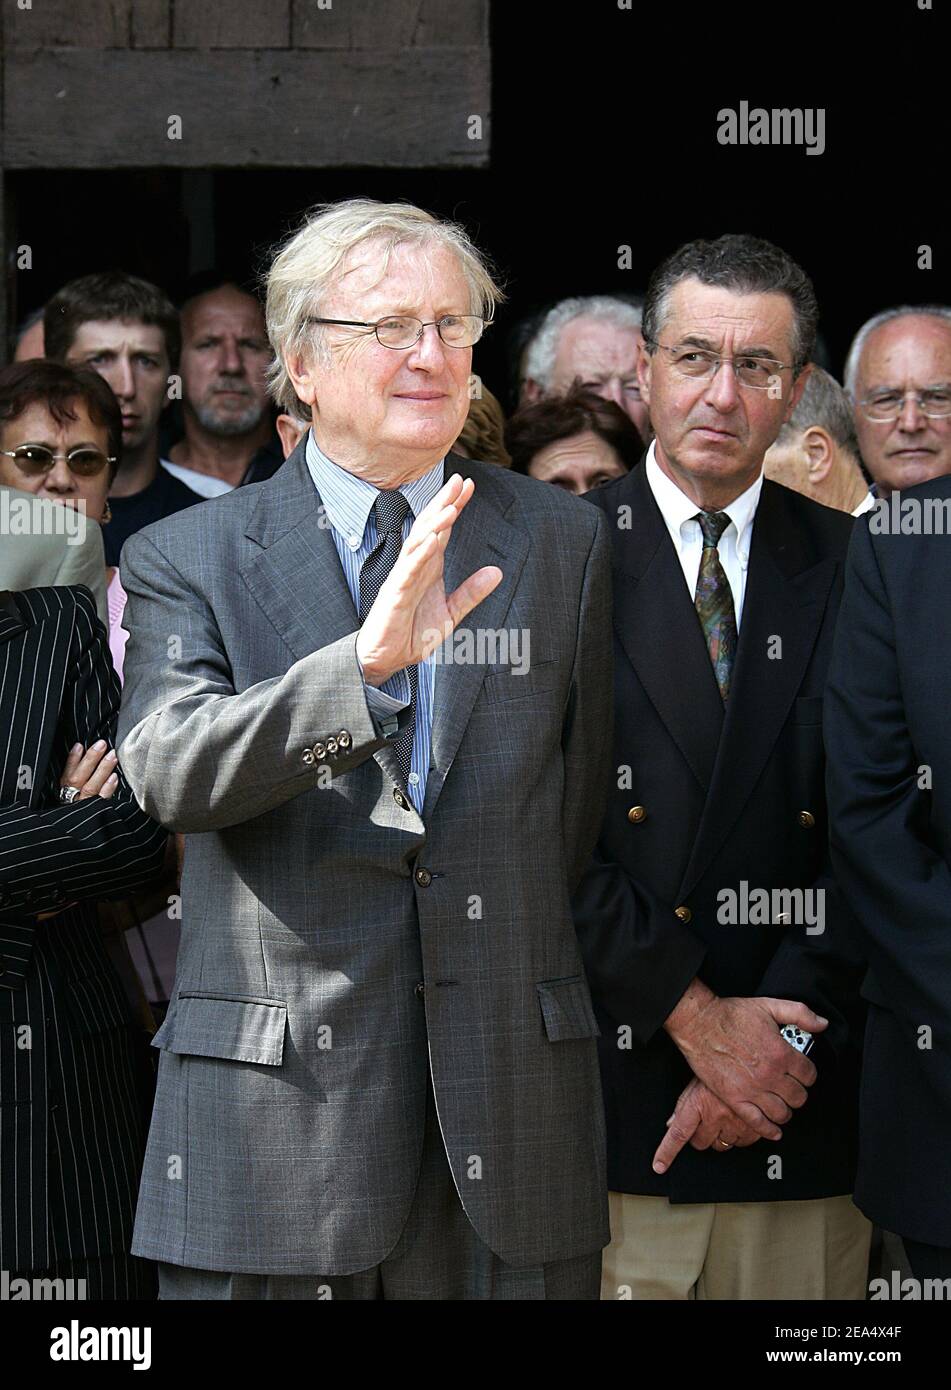 French actor Claude Rich attends the funeral of the late French actor Jacques Dufilho held at the cathedral of Mirande, southwestern France, on August 31, 2005. Dufilho died on August 28 aged 91. Photo by Patrick Bernard/ABACAPRESS.COM. Stock Photo